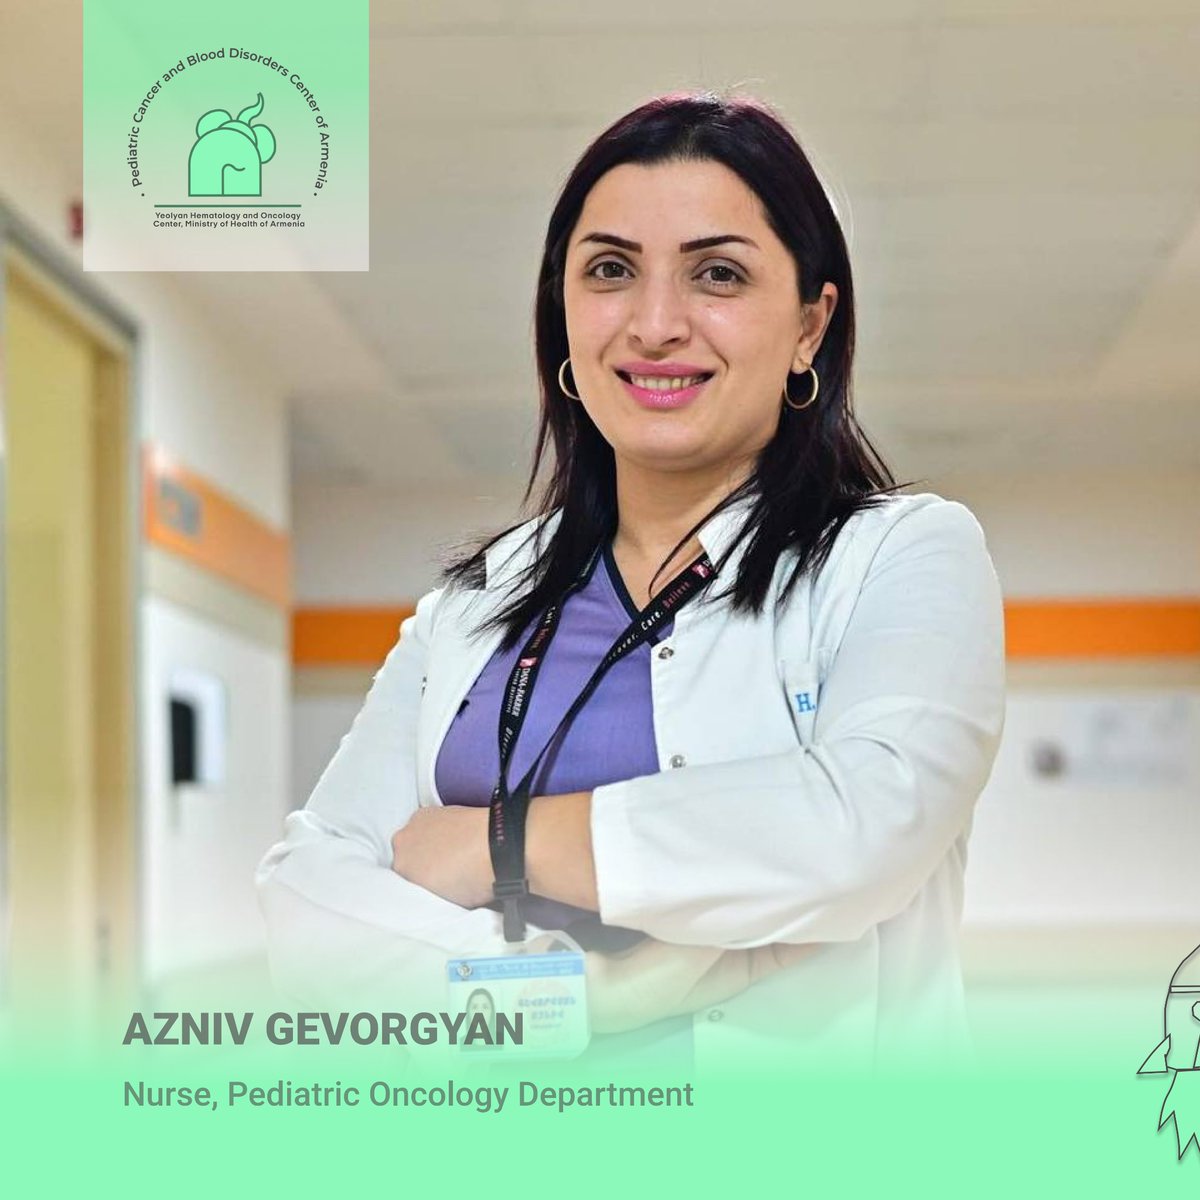 👩🏻‍⚕️ 'I have never imagined myself in a different field, in a different profession,' says Azniv Gevorgyan, a nurse at the Pediatric Oncology Department (also former nurse at the Bone Marrow Transplantation Department).